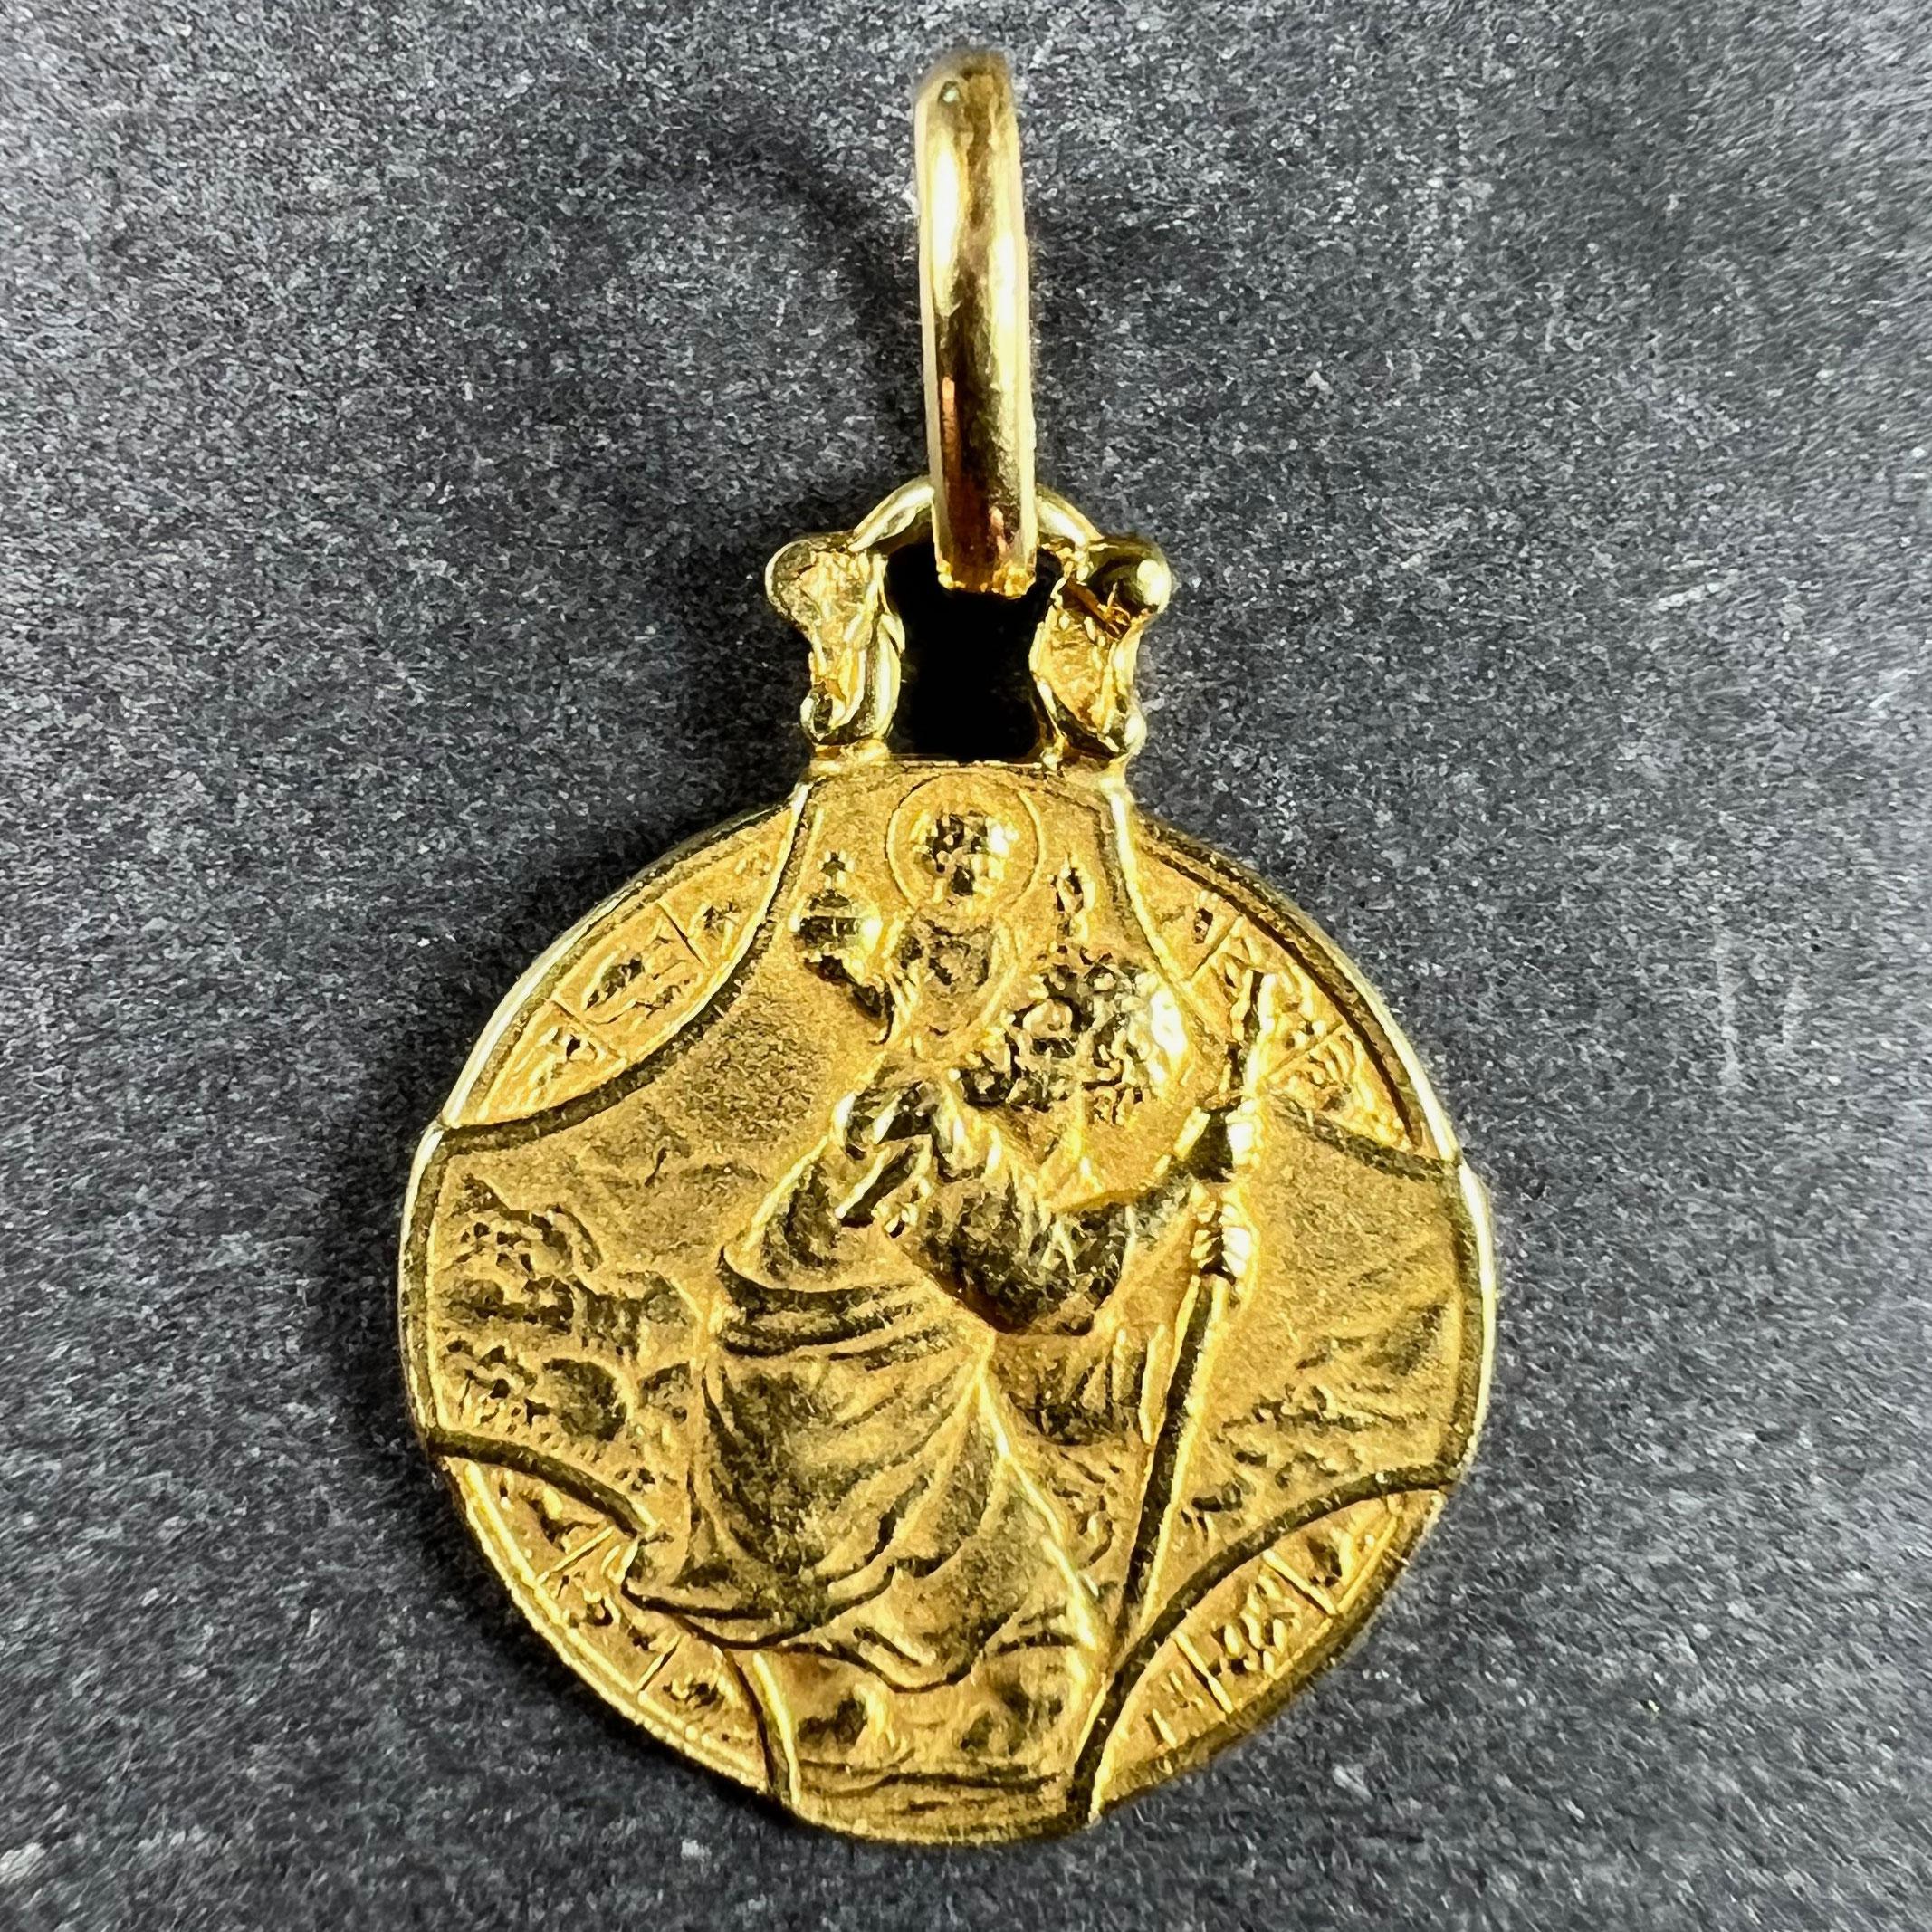 A French 18 karat (18K) yellow gold charm pendant depicting St Christopher as he carries the infant Christ across a river, within a cross shape overlaying a circle depicting the zodiac signs. 

The reverse depicts the Triumph of Speed showing a